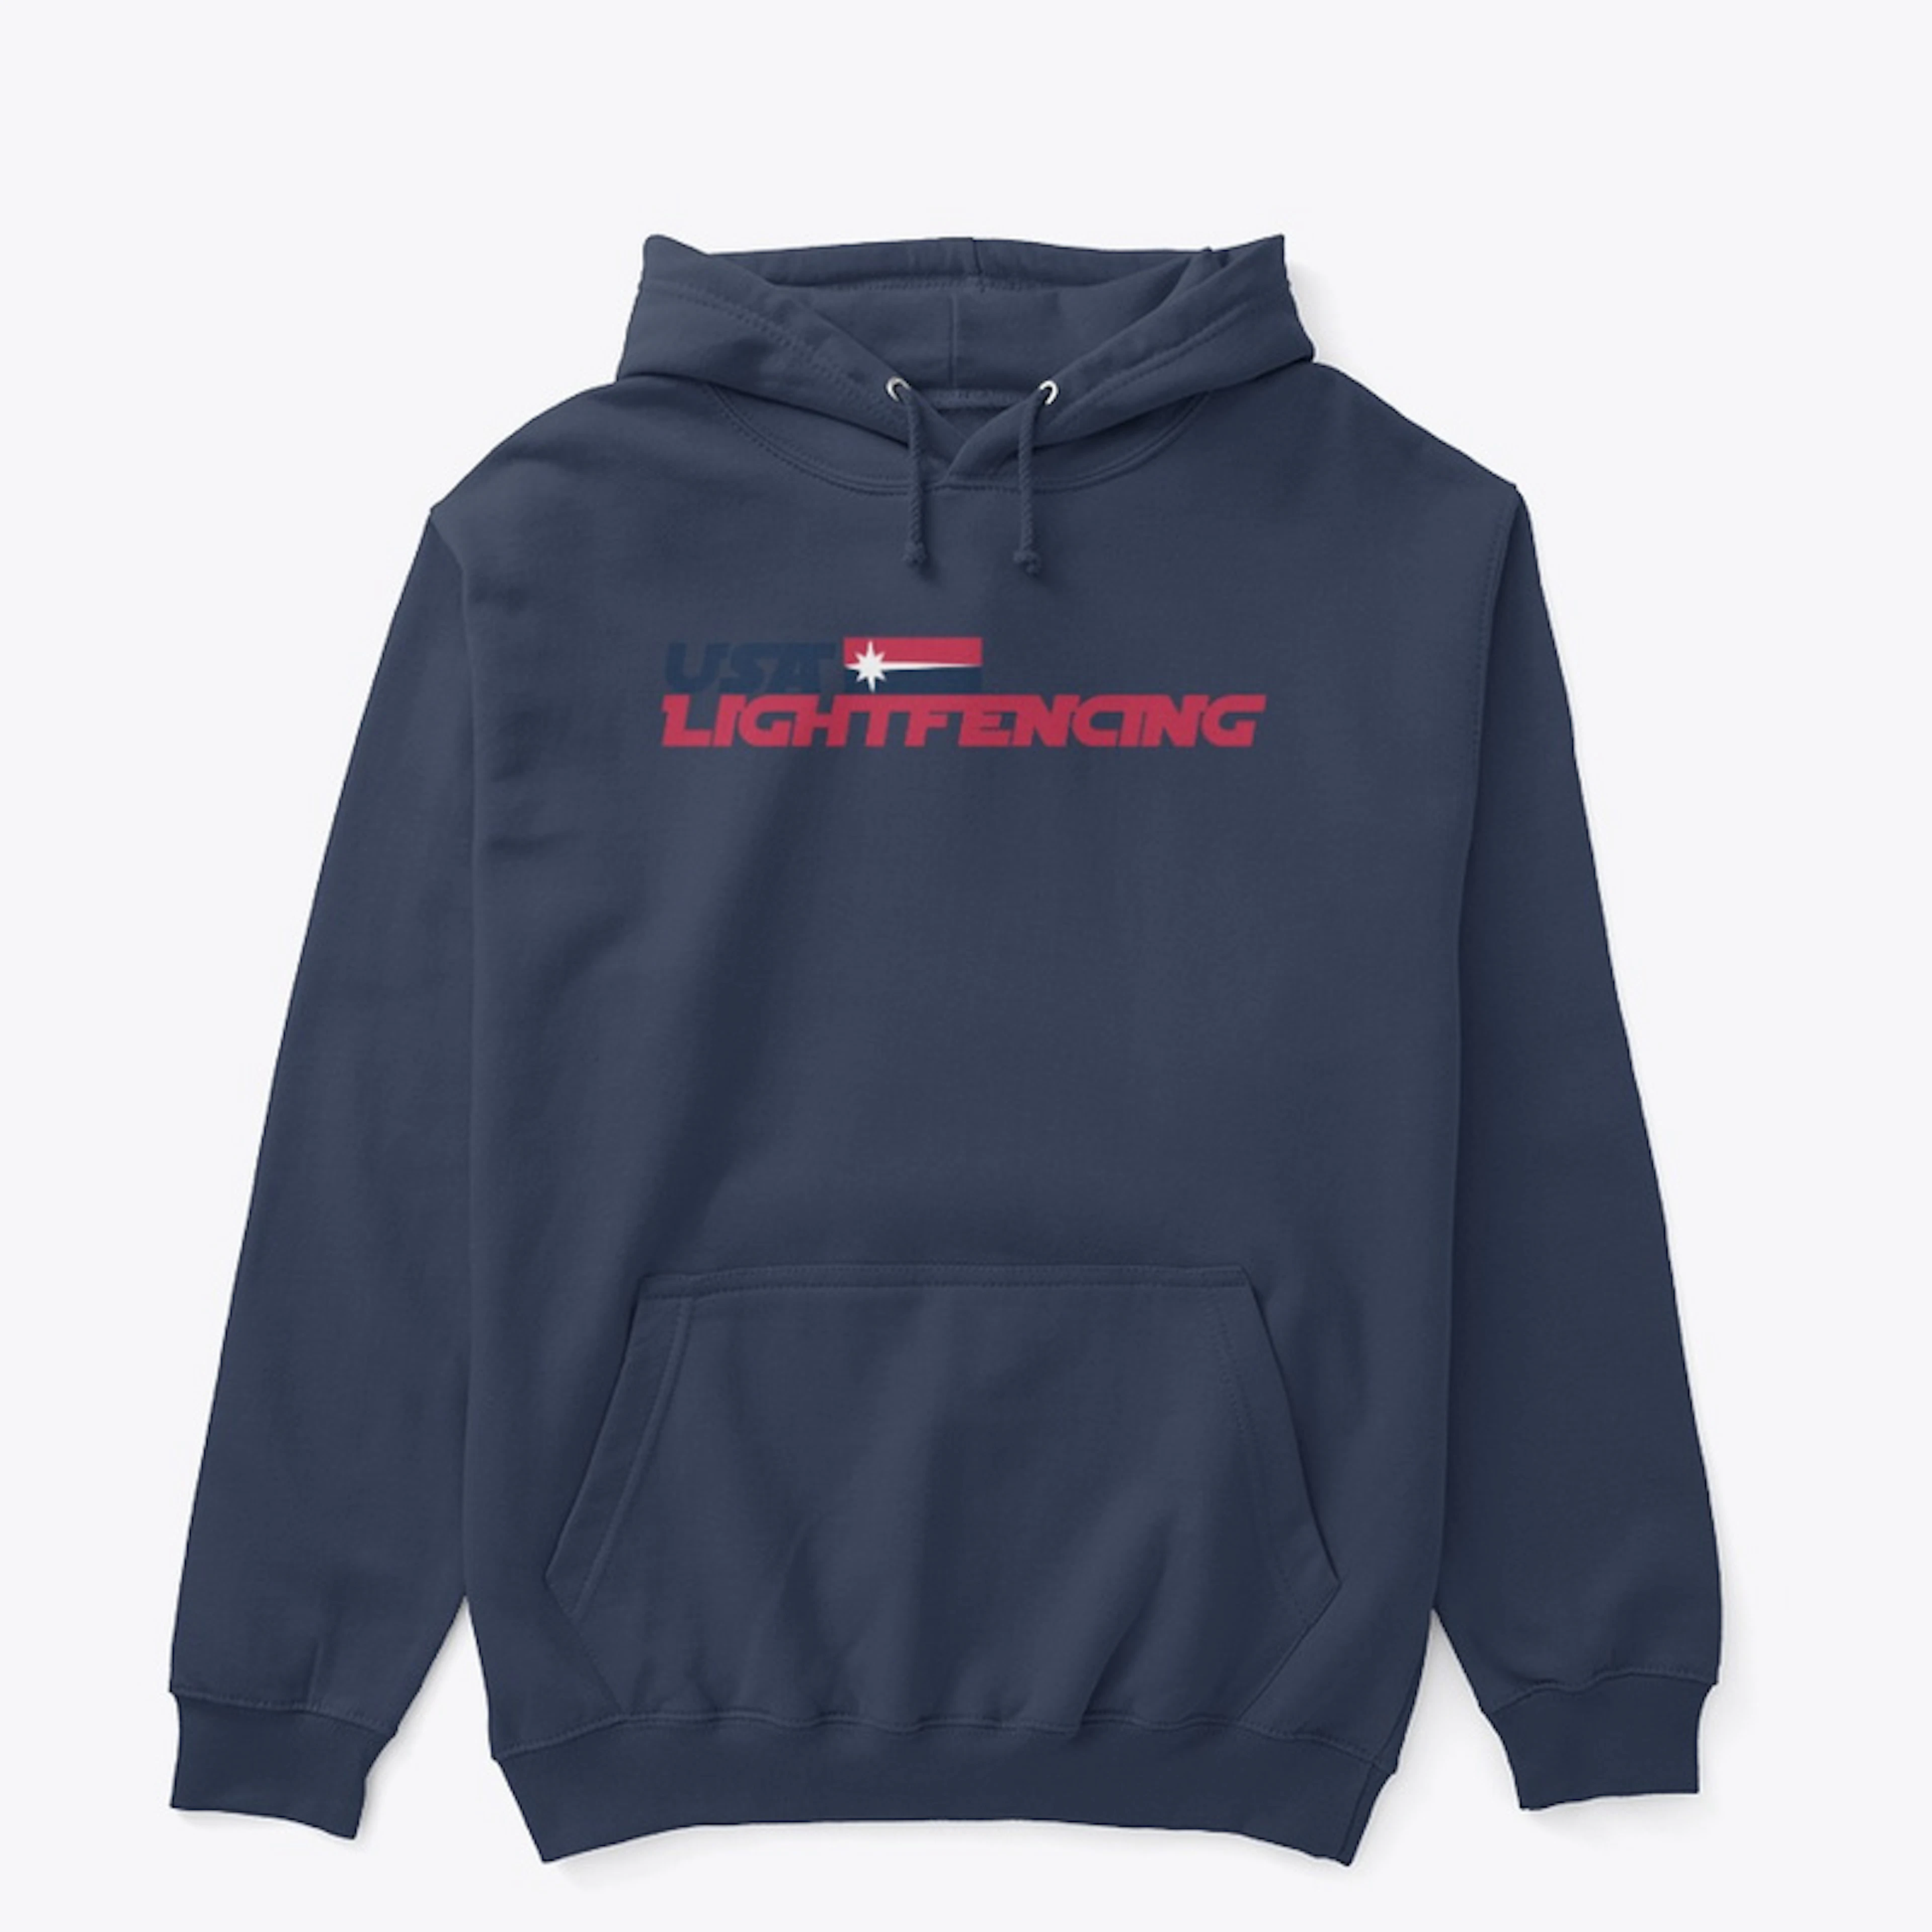 USA Lightfencing Official 